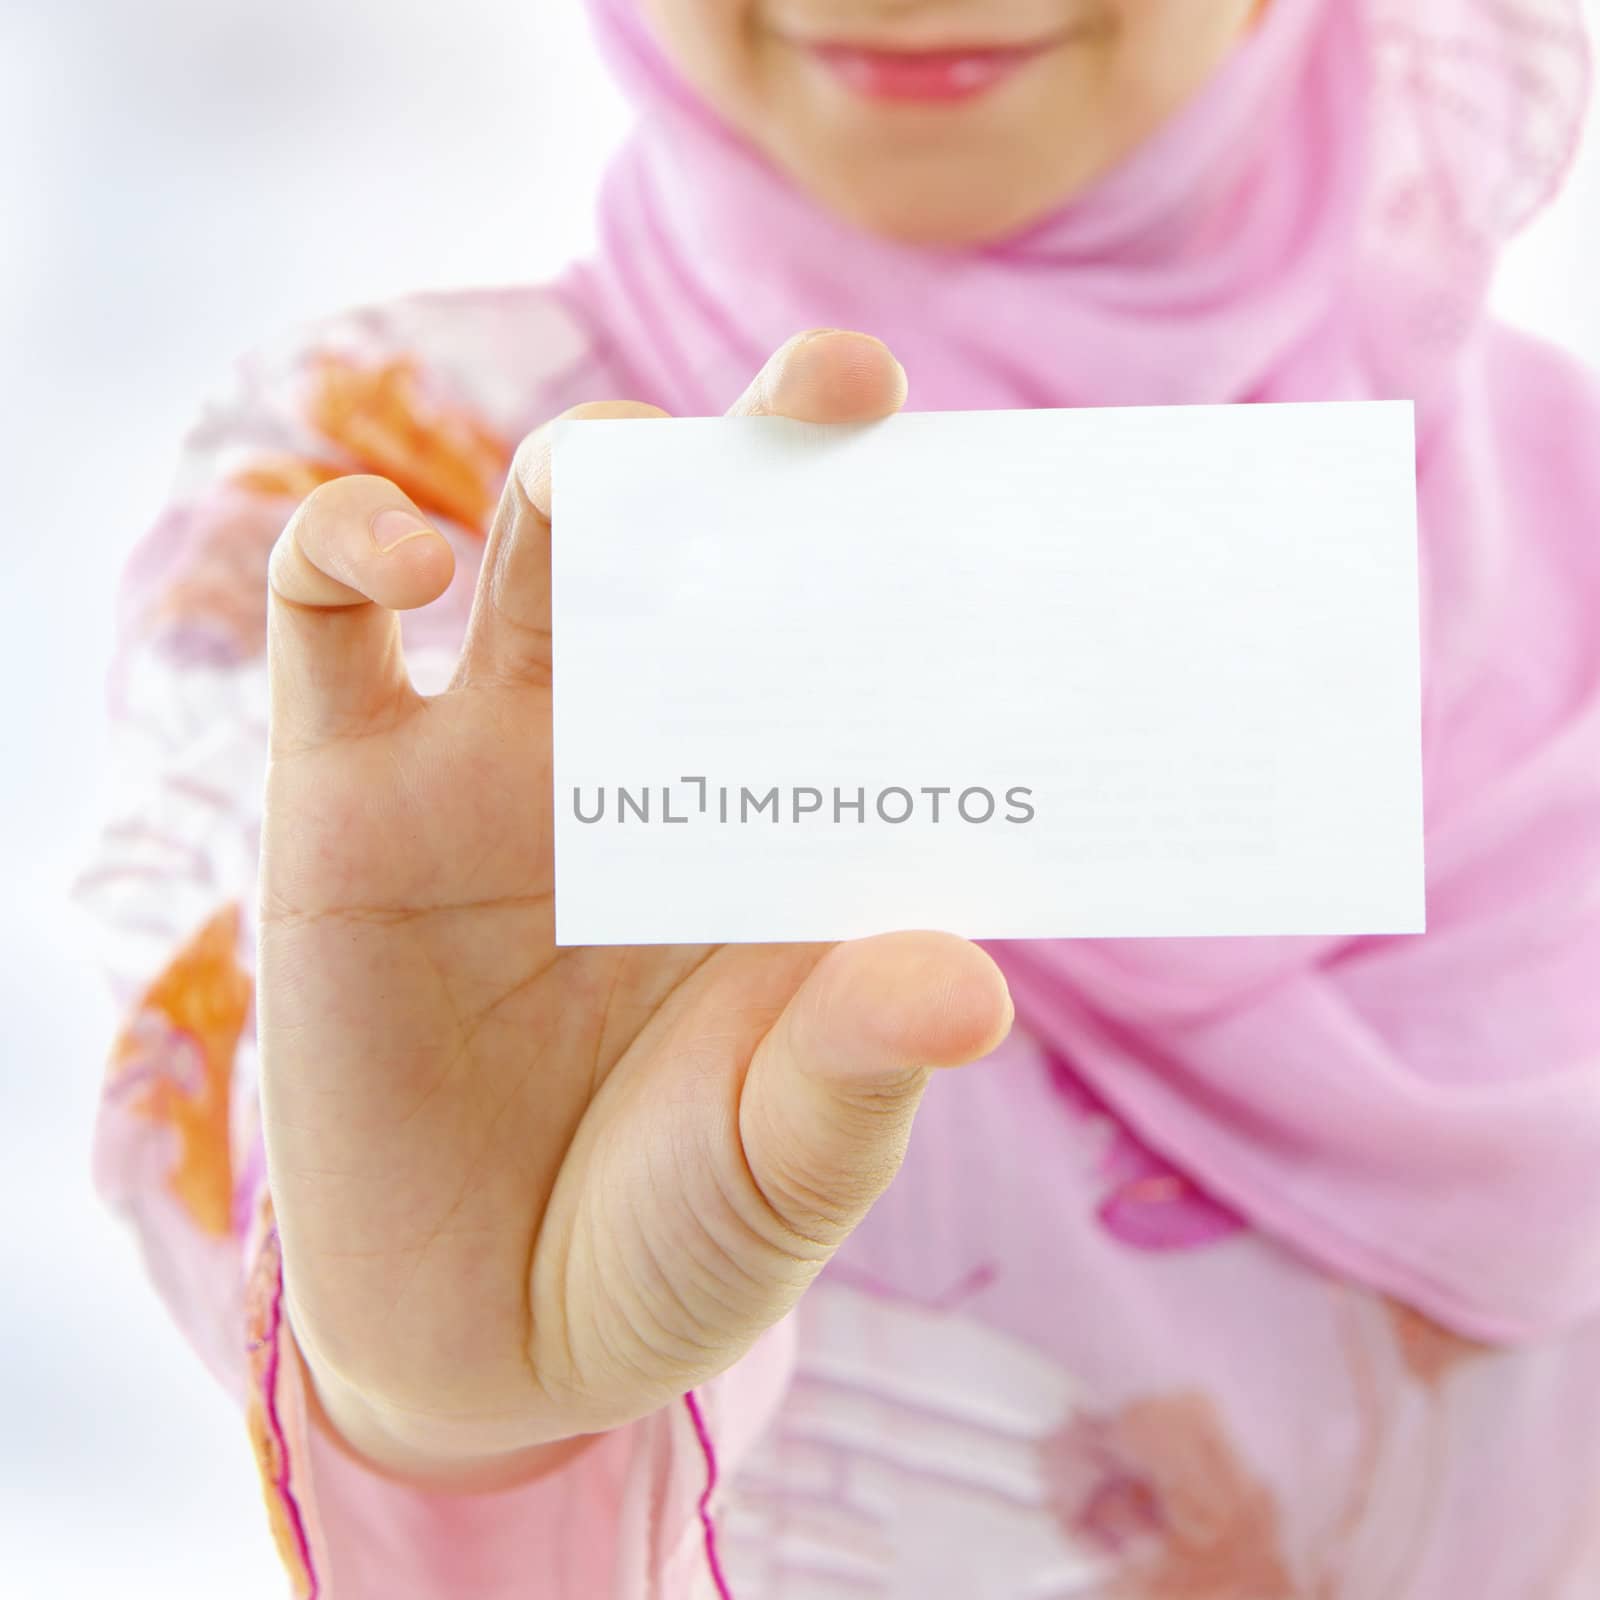 Muslim female holding business card, focus on hand